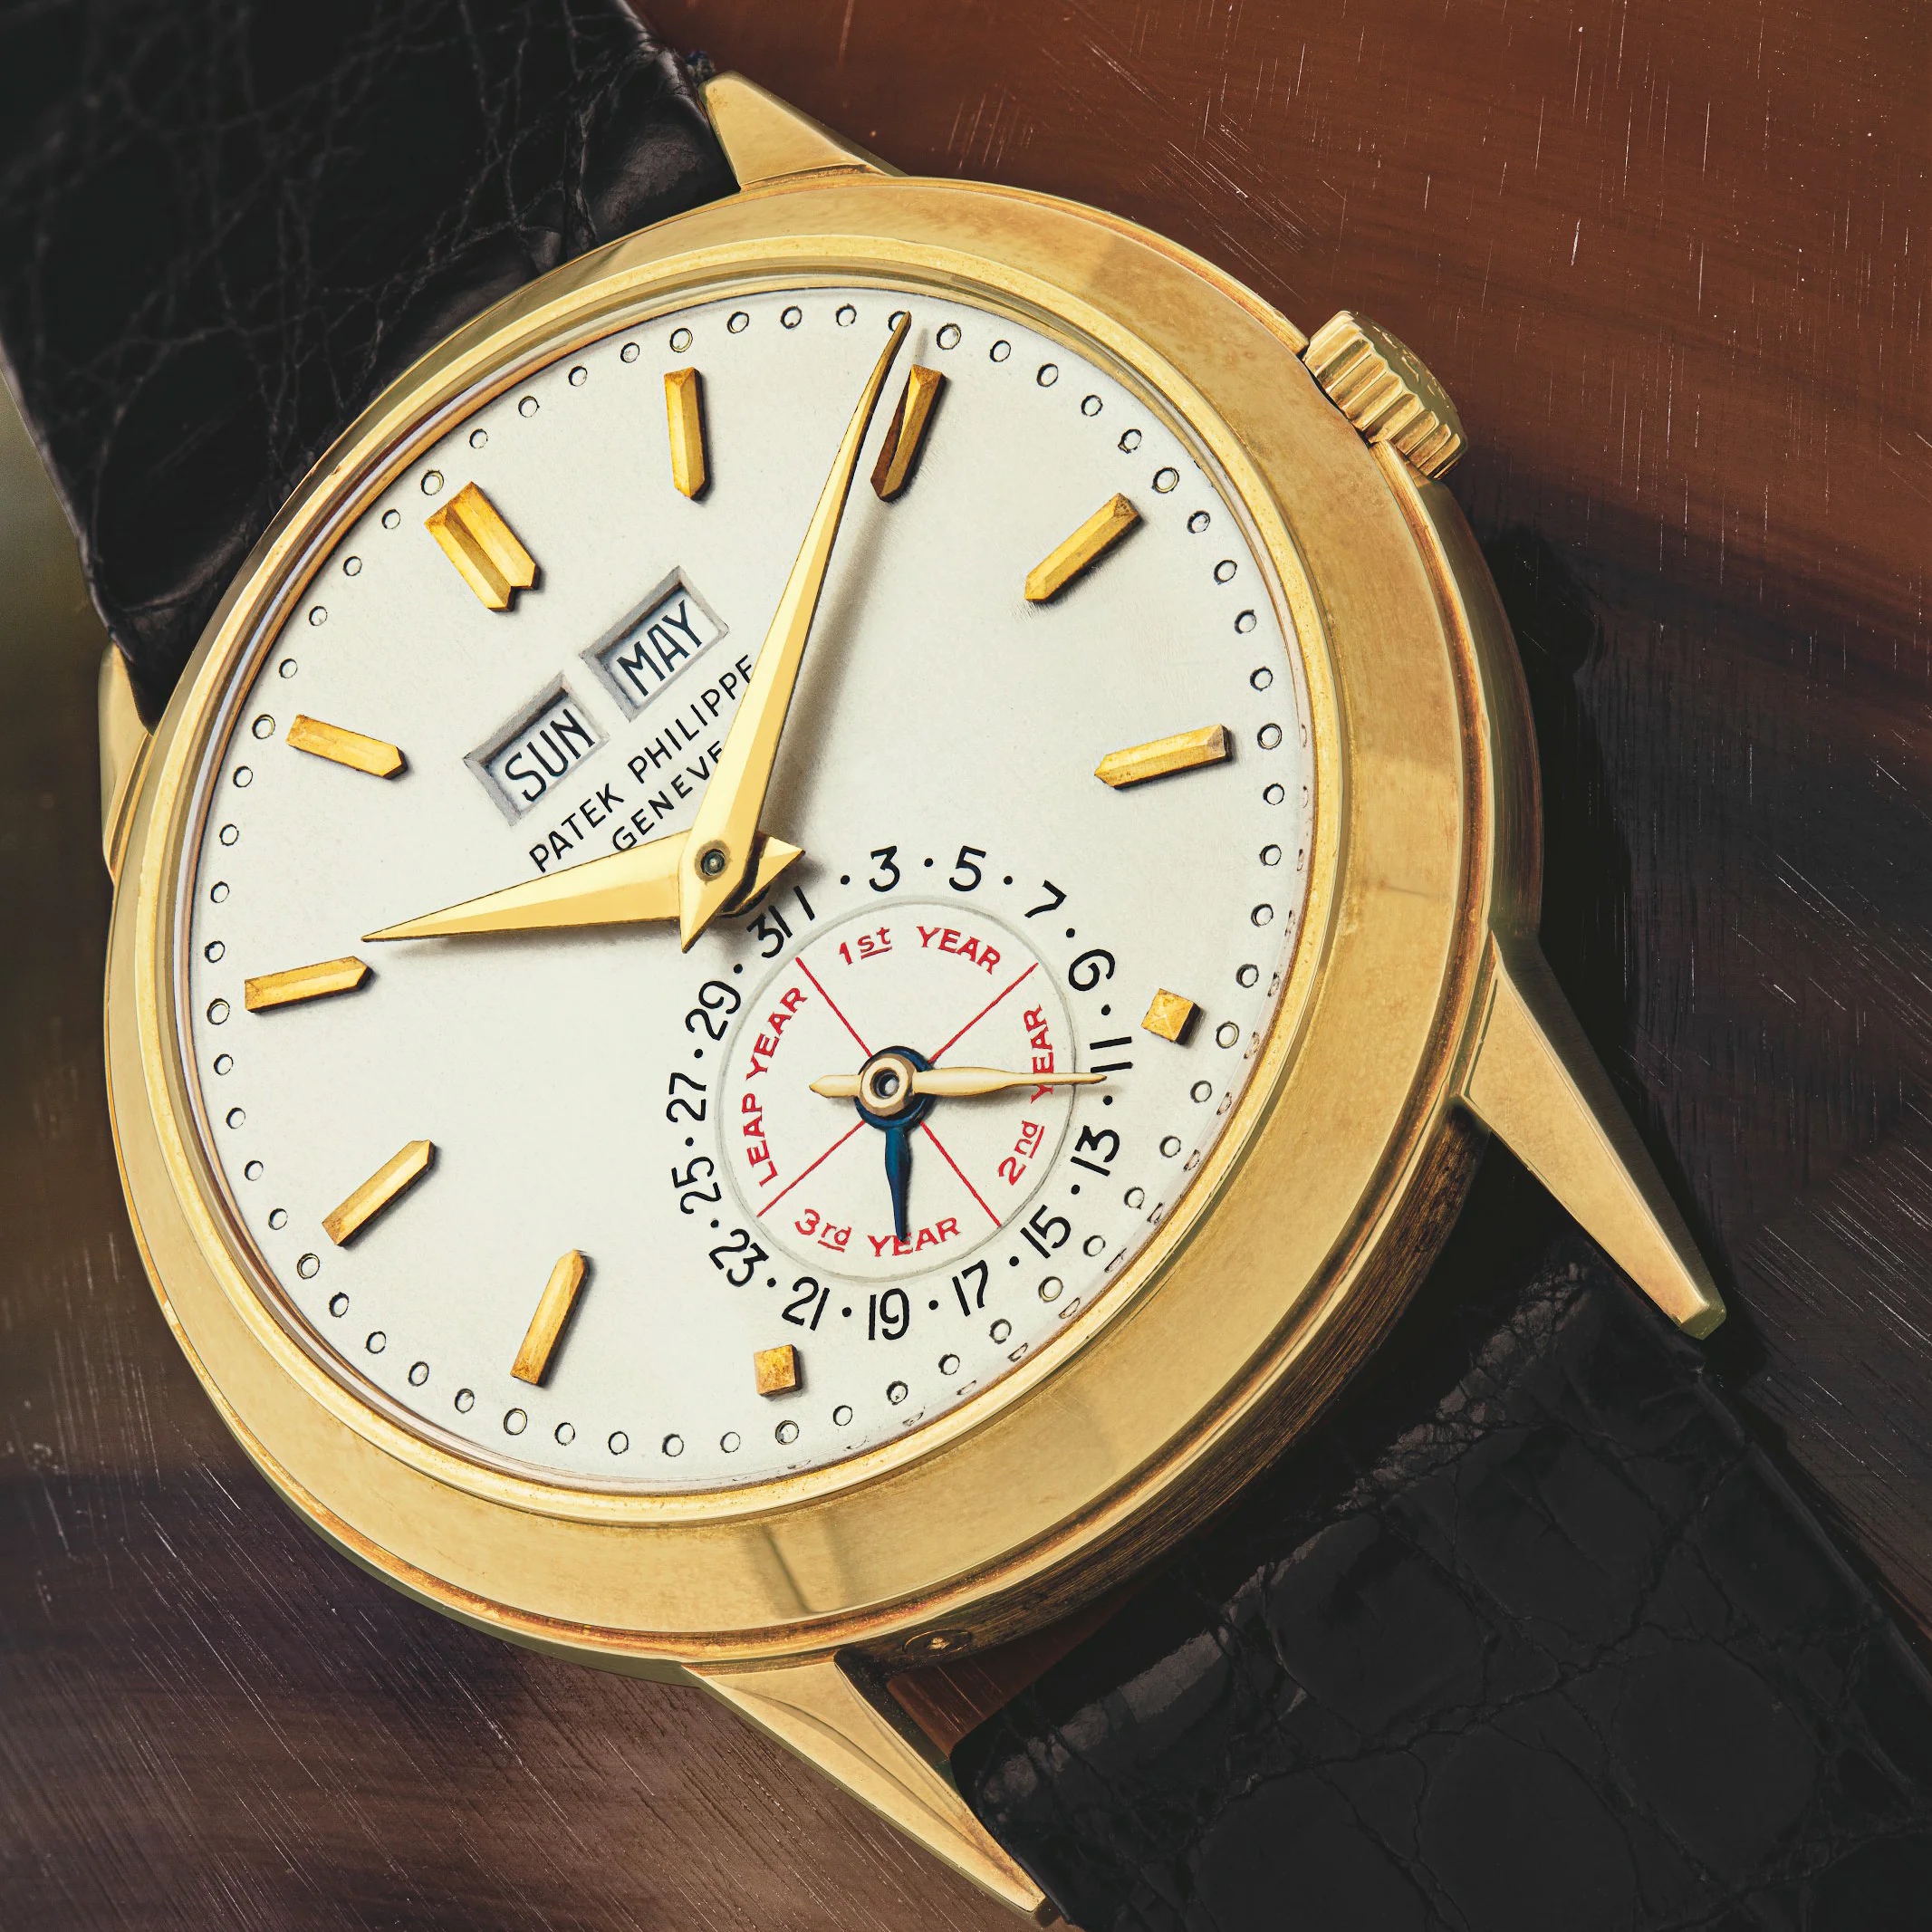 ROLEX Important Watches, Collector's Wristwatches&Clocks 2005オークション カタログ 時計 ロレックス , パテックフィリップ ほか